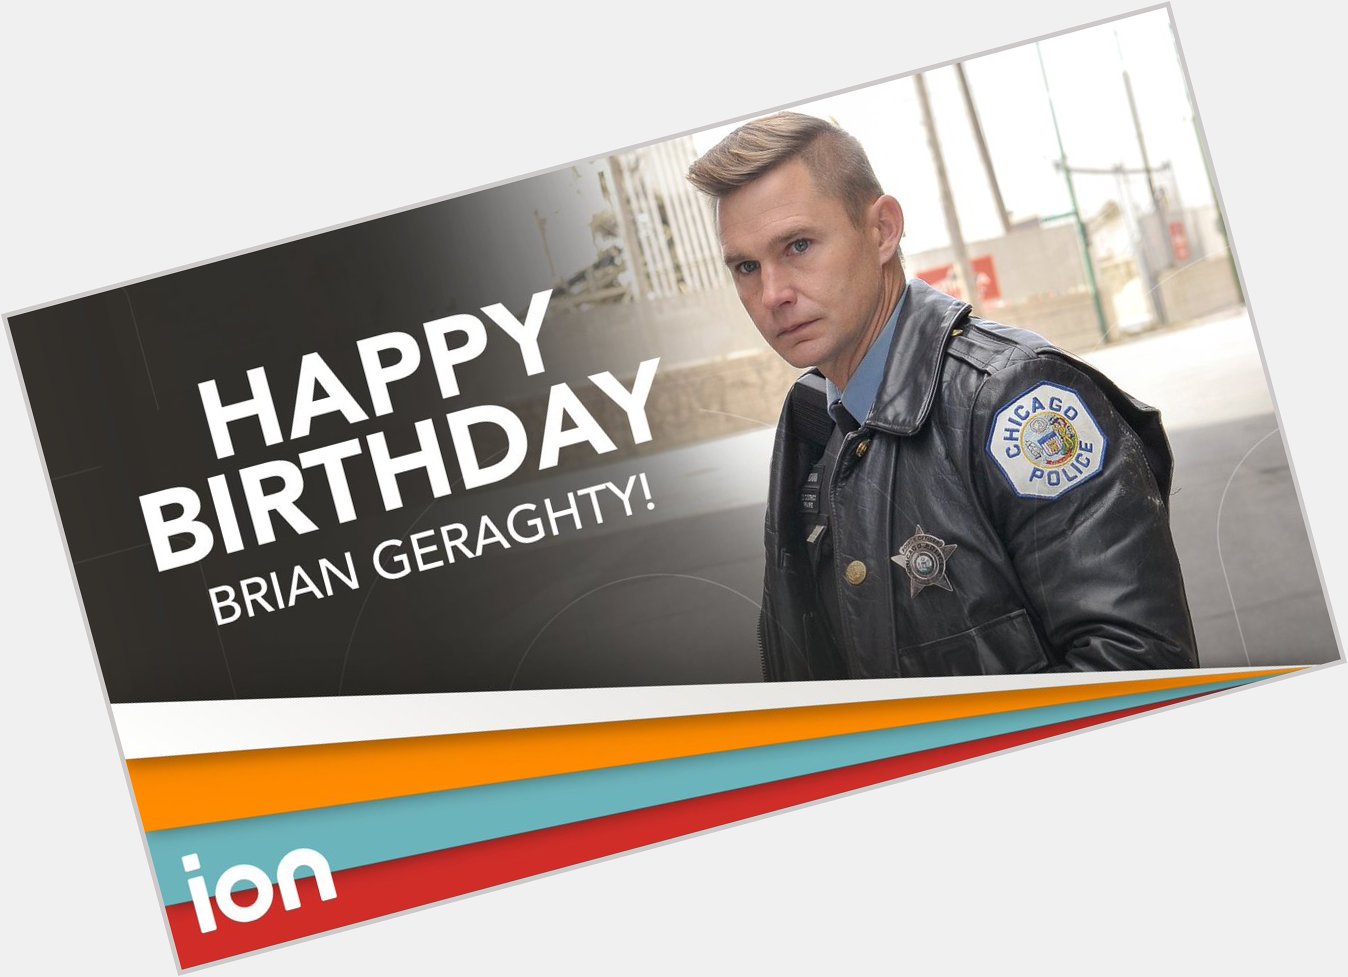 Happy Birthday to one of our         officers, Brian Geraghty! 